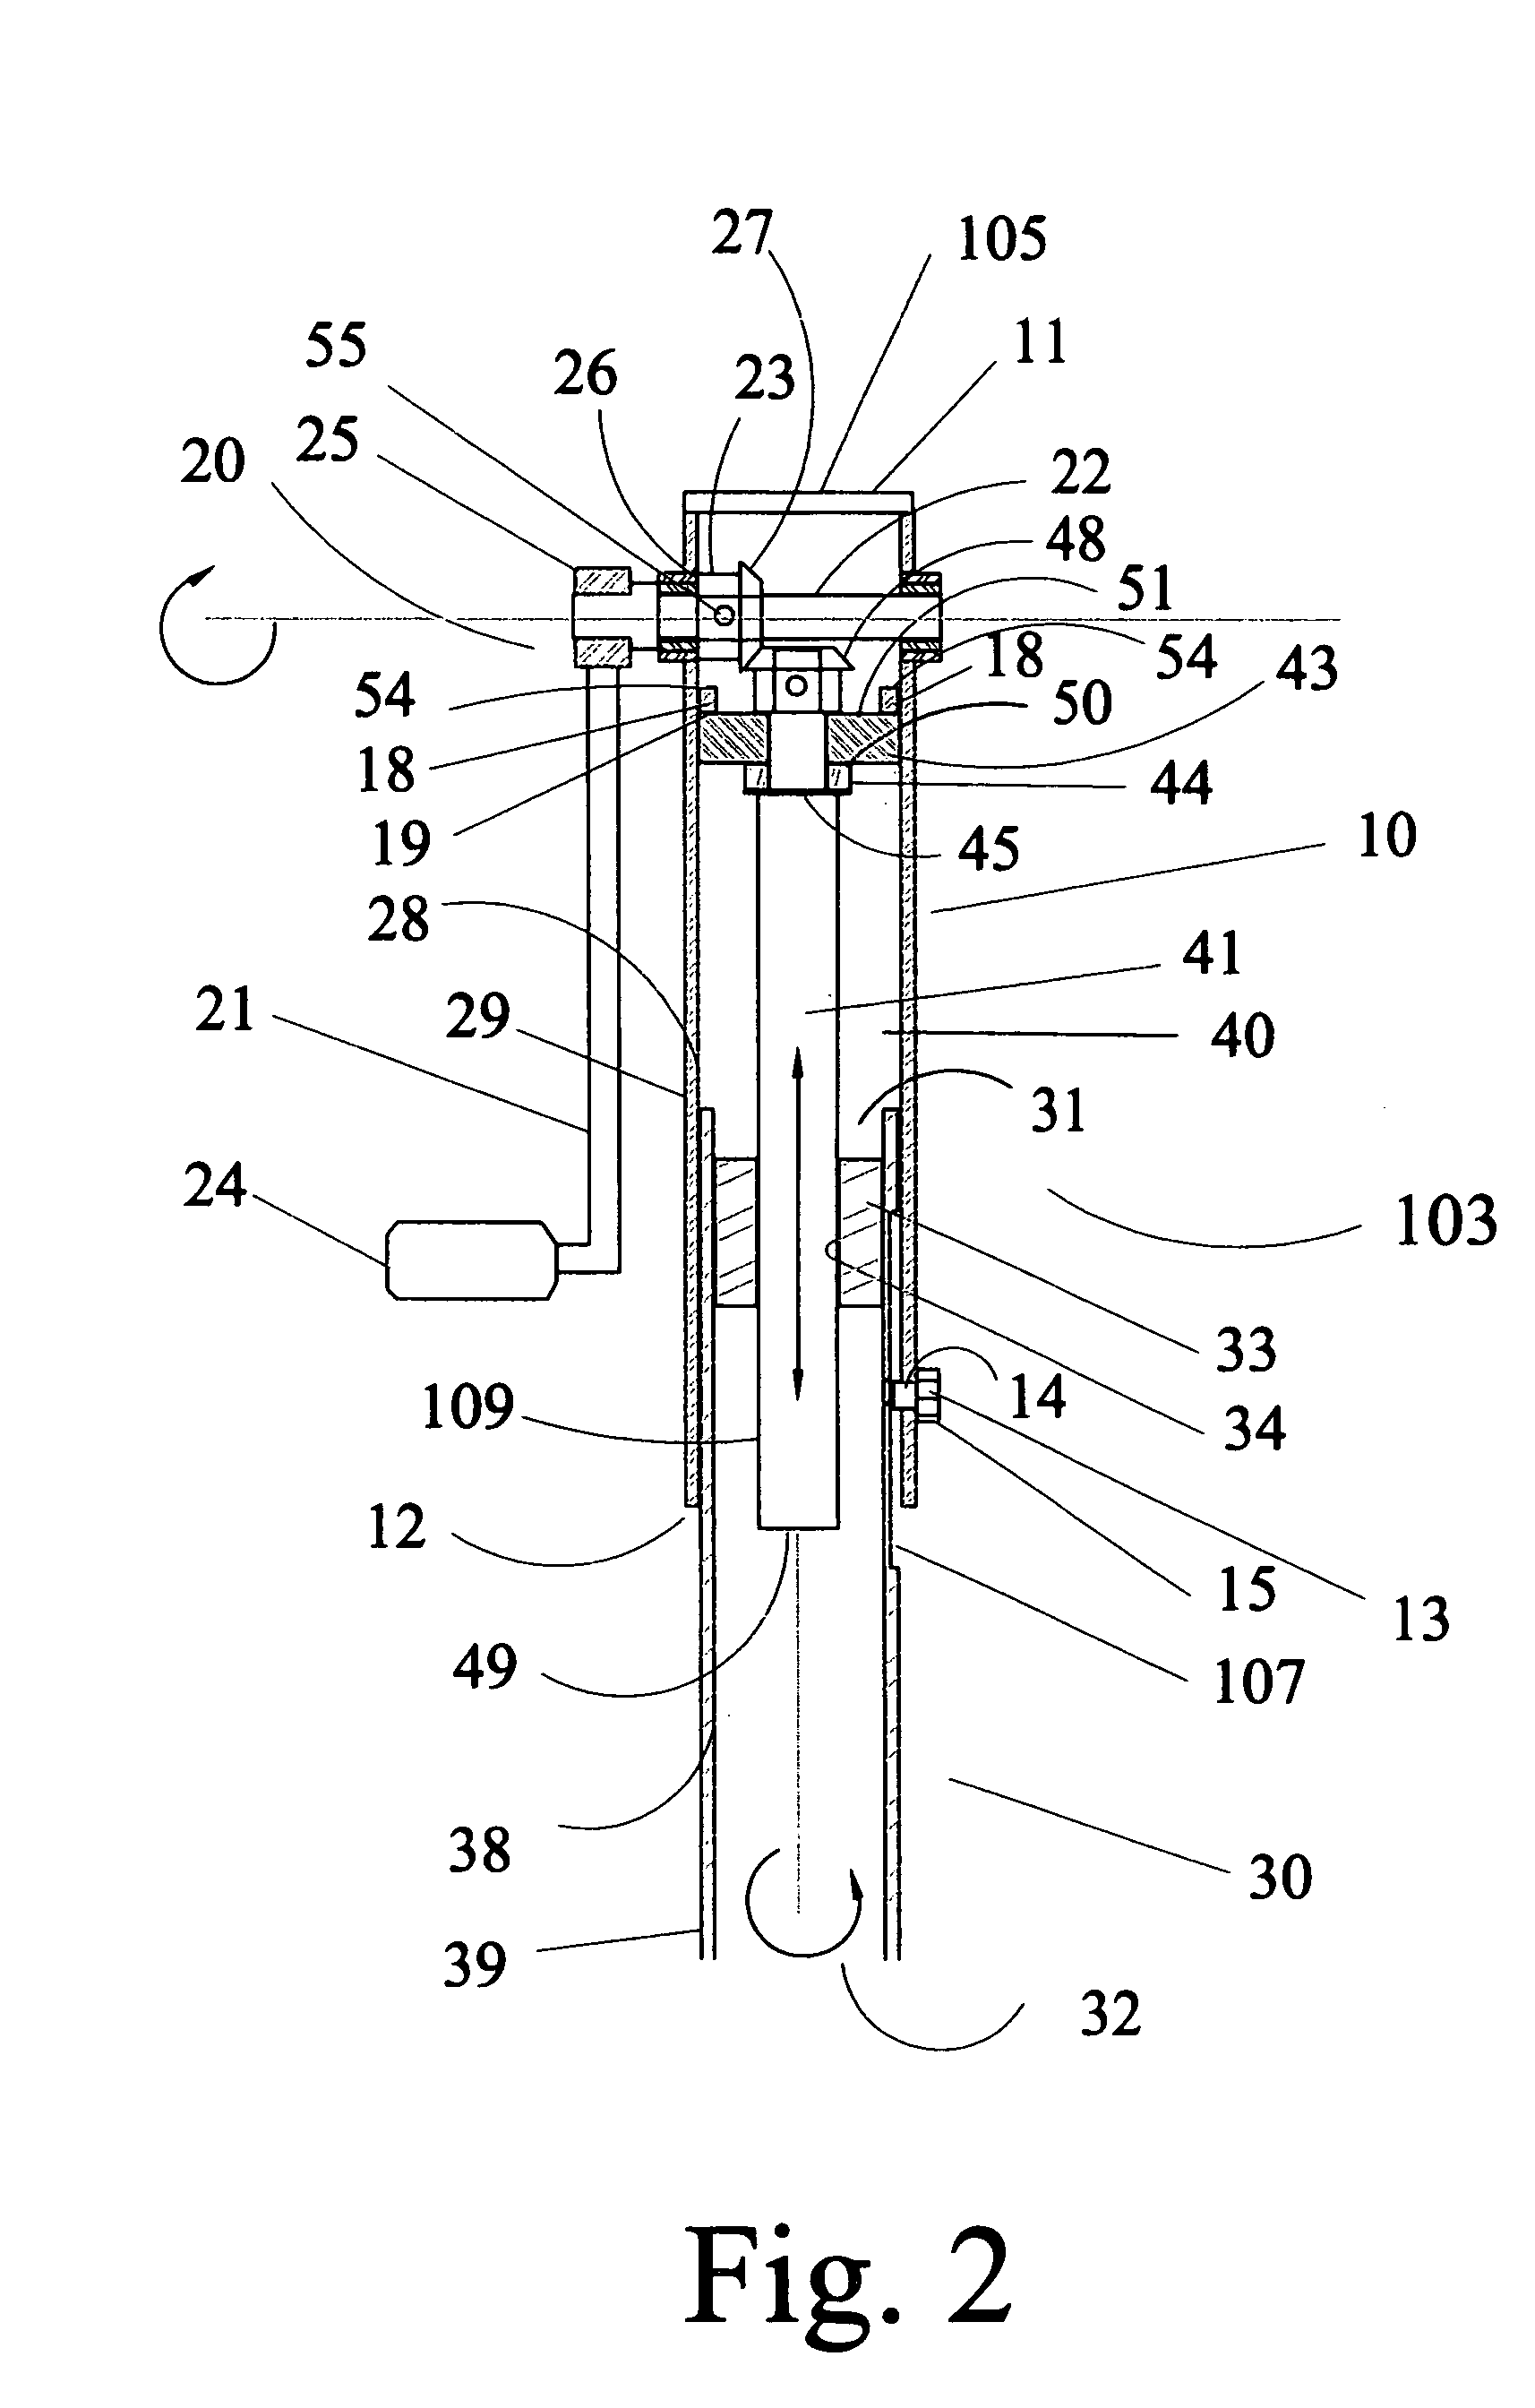 Height adjustment hitch apparatus